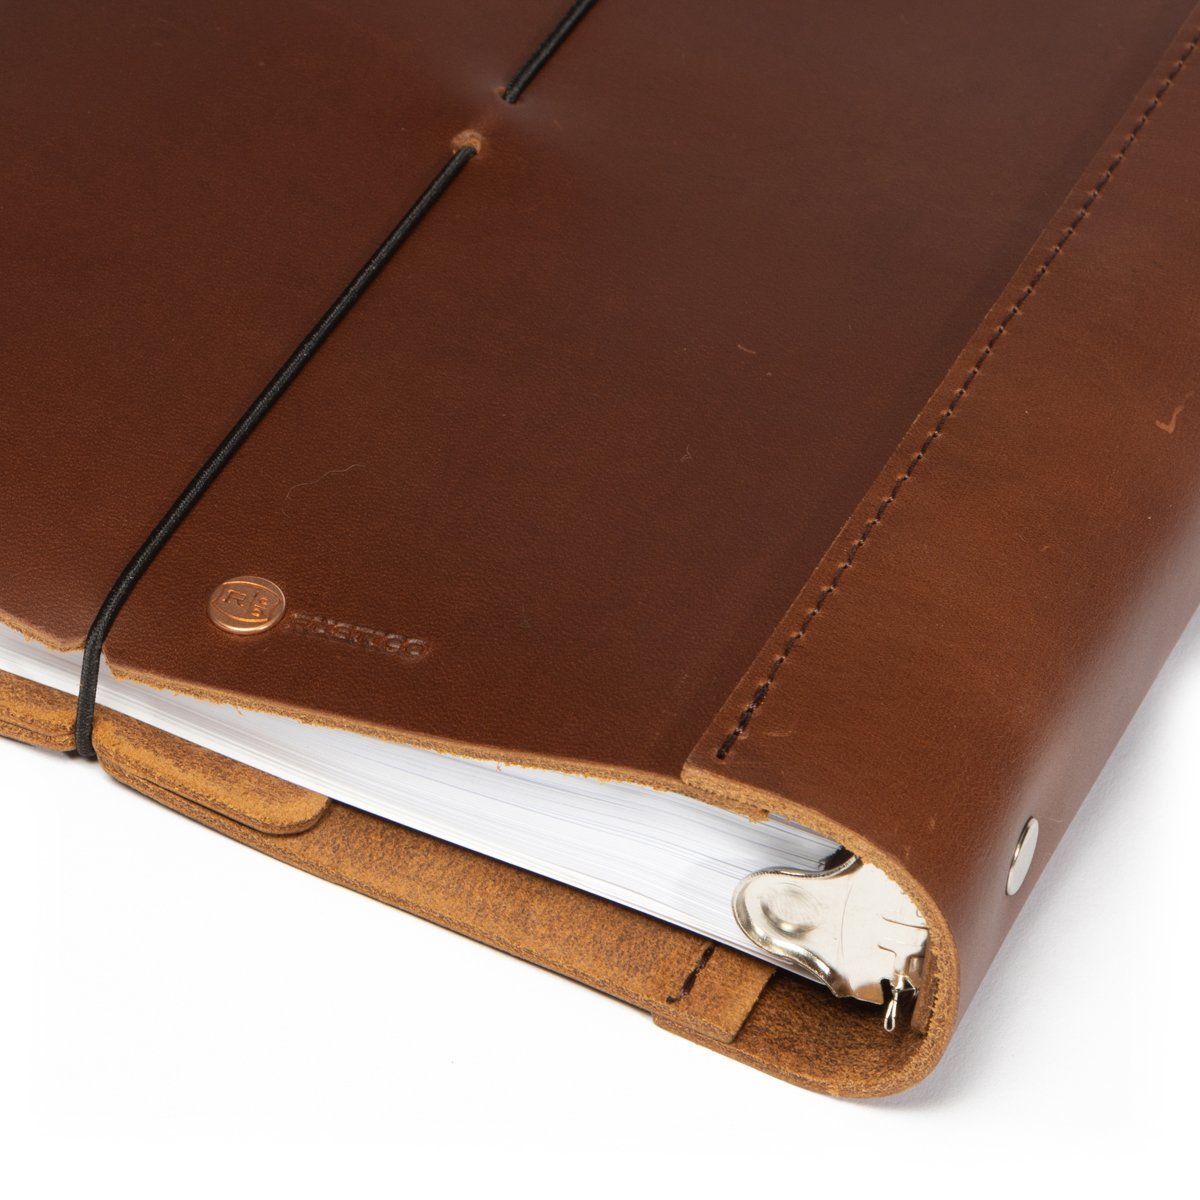 Rustico OF0010-0002 Leather Weekly Task Planner - Small in Saddle